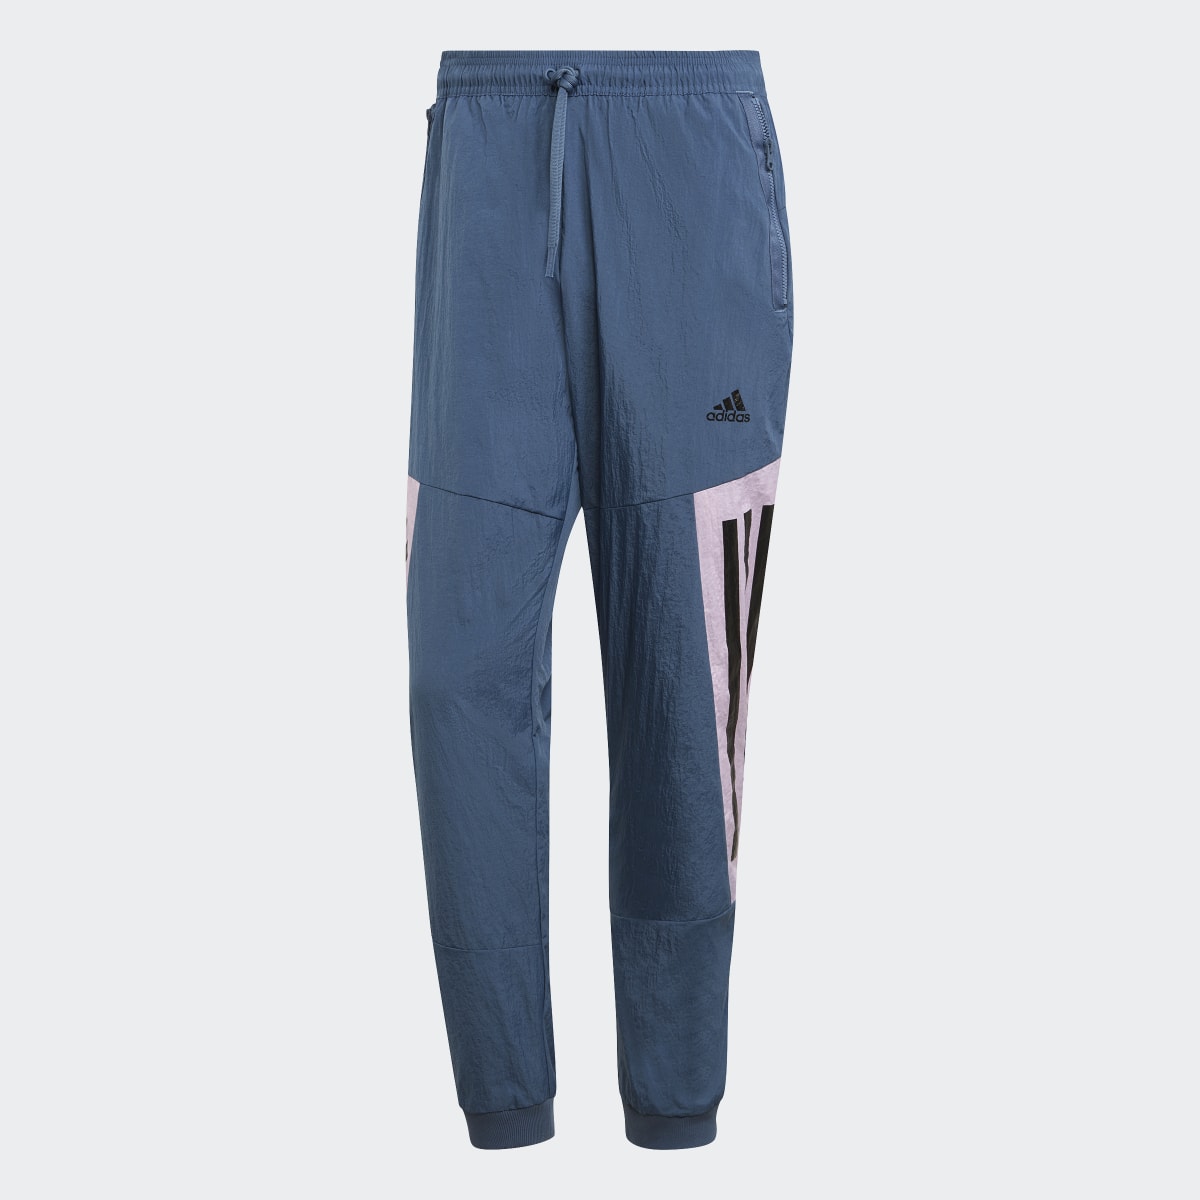 Adidas Future Icons 3-Stripes Woven Tracksuit Bottoms. 4